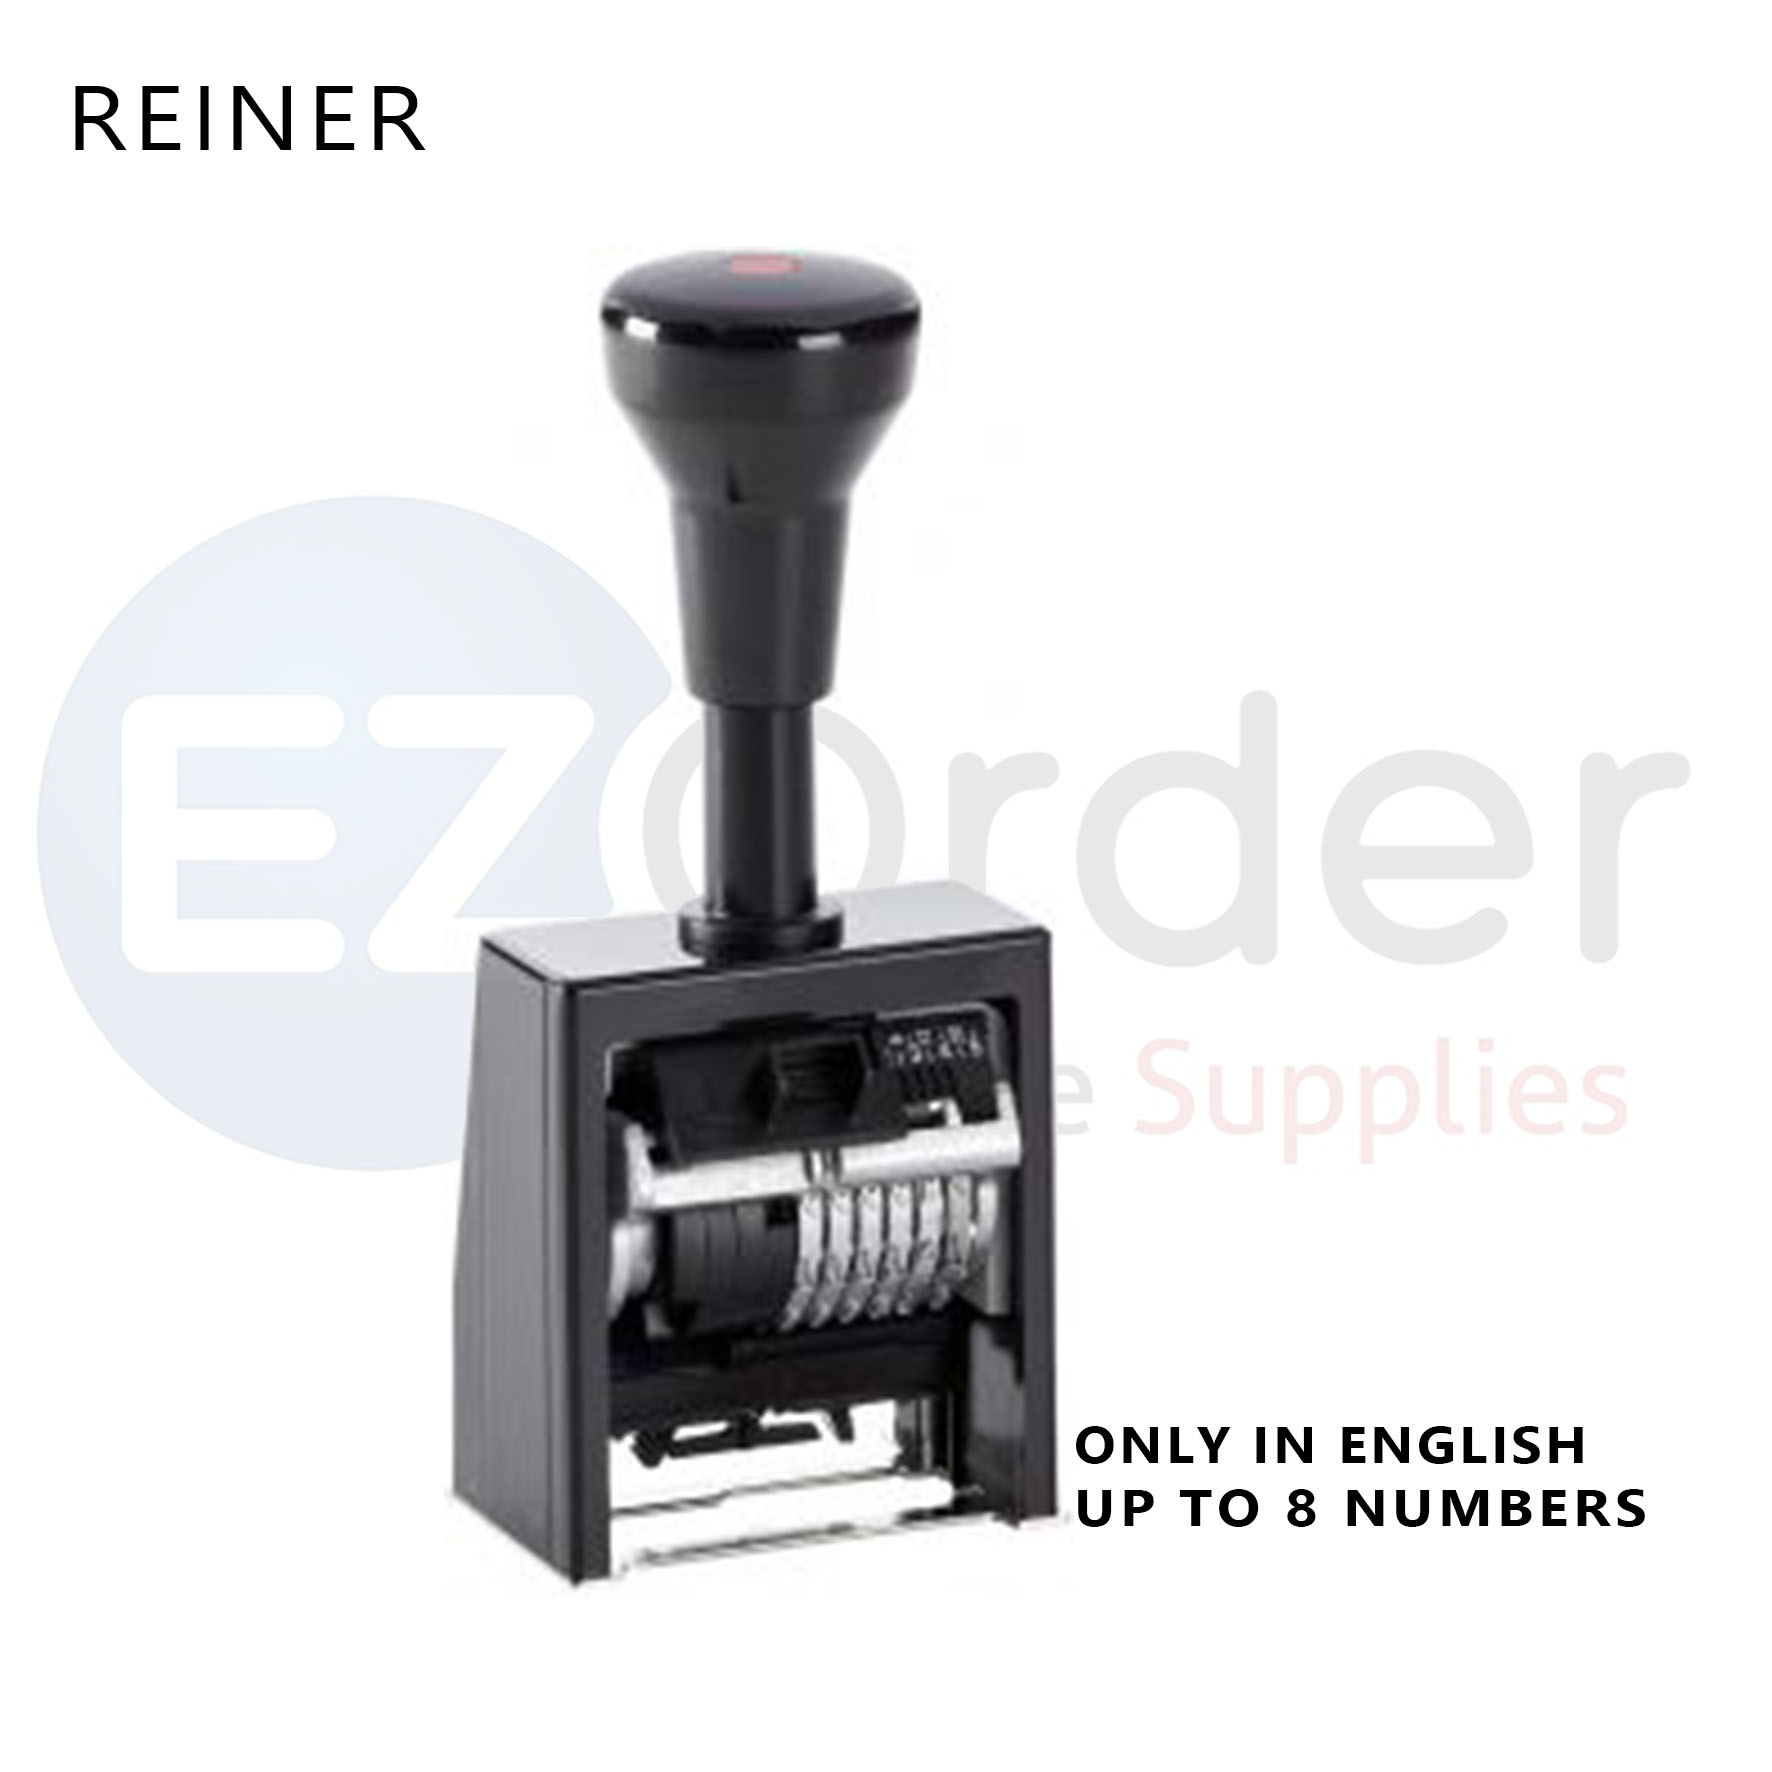 #Reiner automatic numberer,up 8 numbers Eng